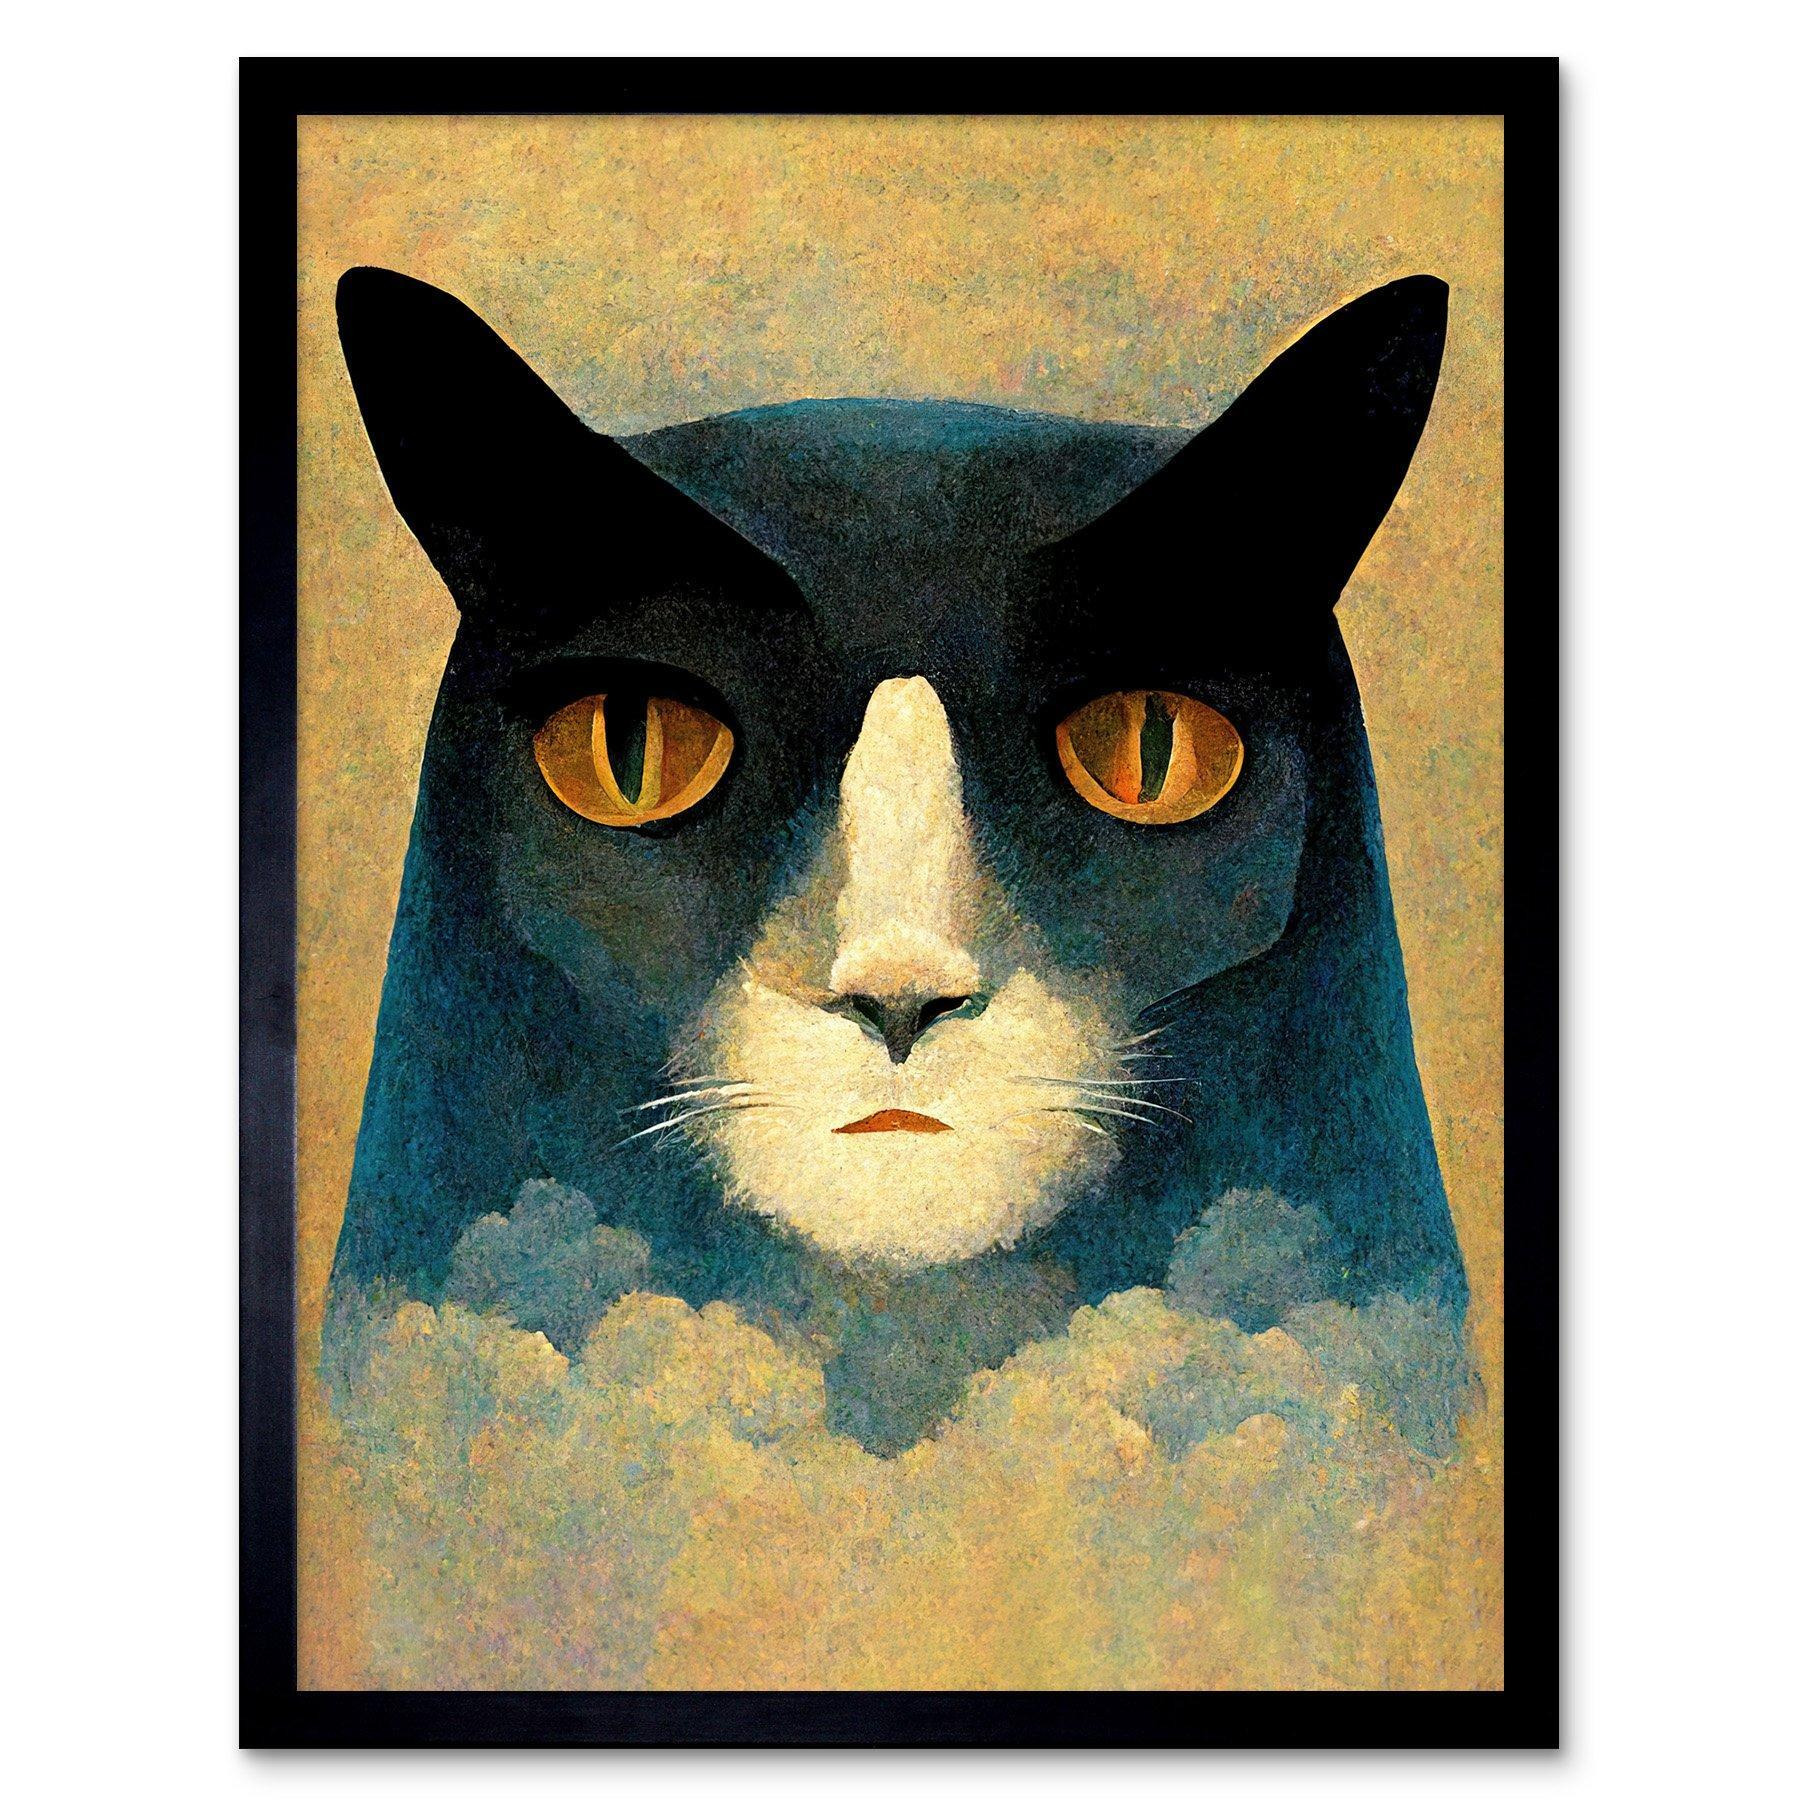 Abstract Melancholy Cat In Clouds Art Print Framed Poster Wall Decor 12x16 inch - image 1